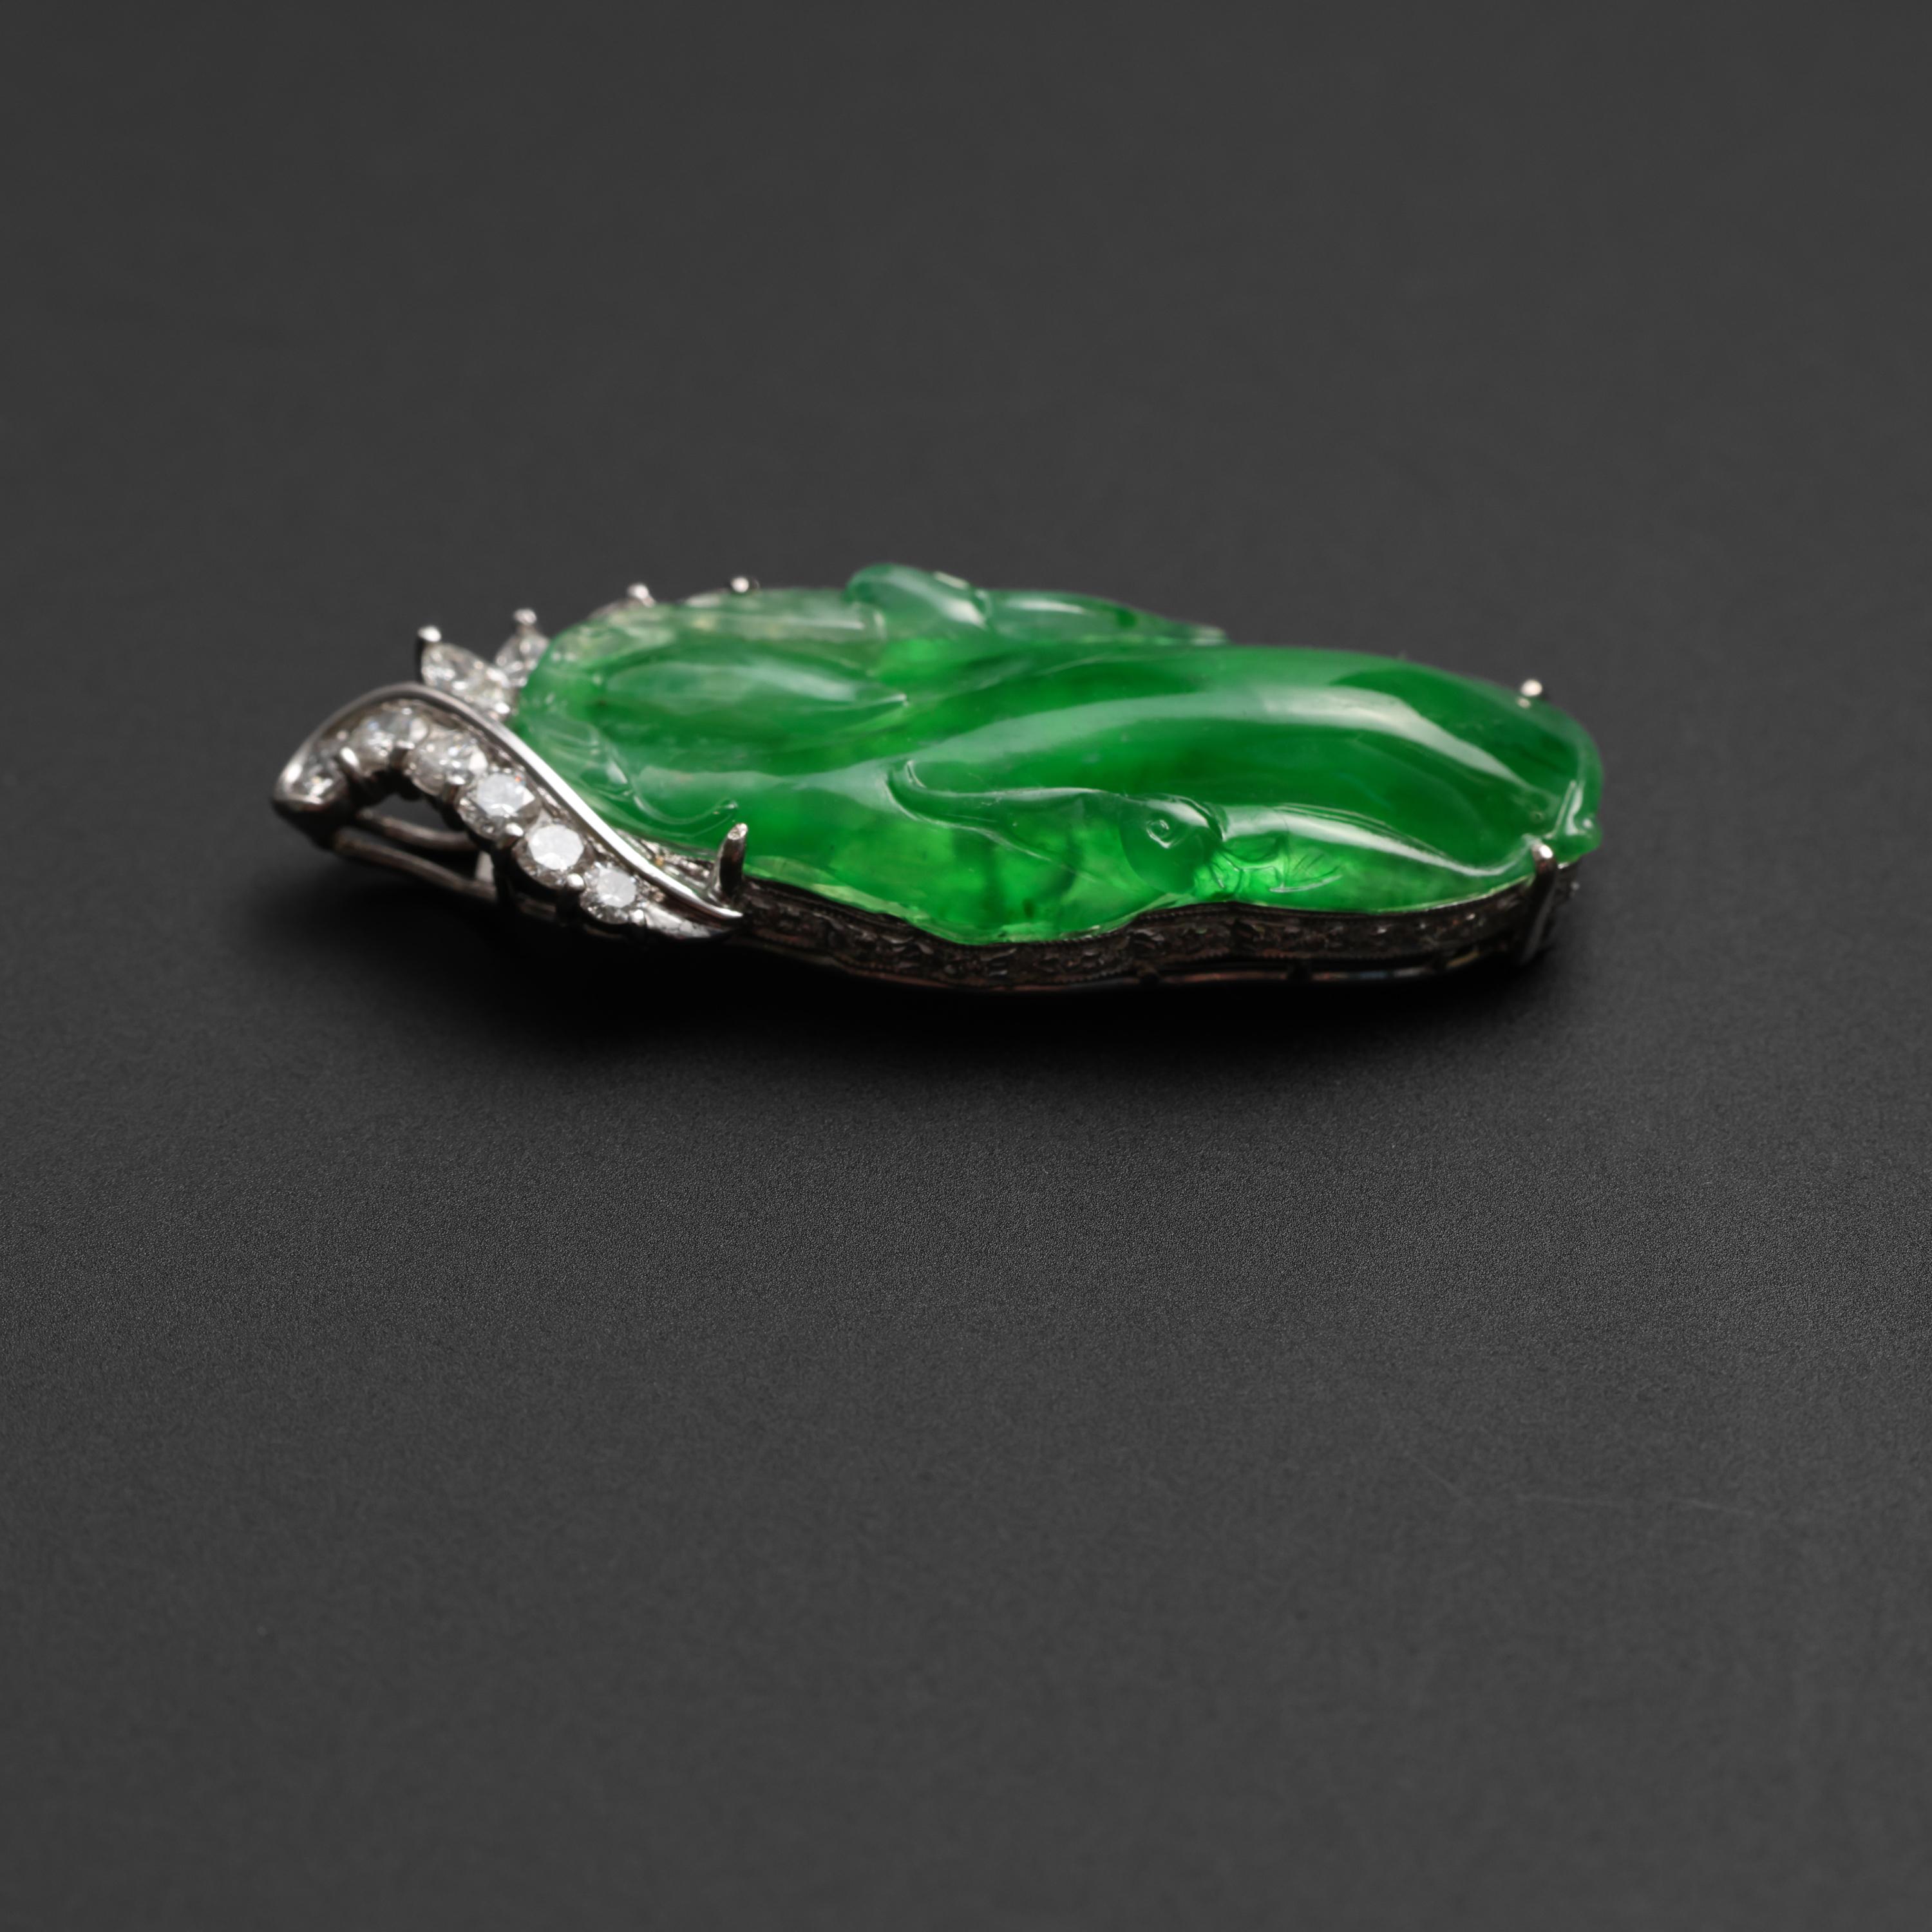 Uncut Imperial Jade Pendant Diamonds 18K White Gold Vintage GIA Certified Untreated